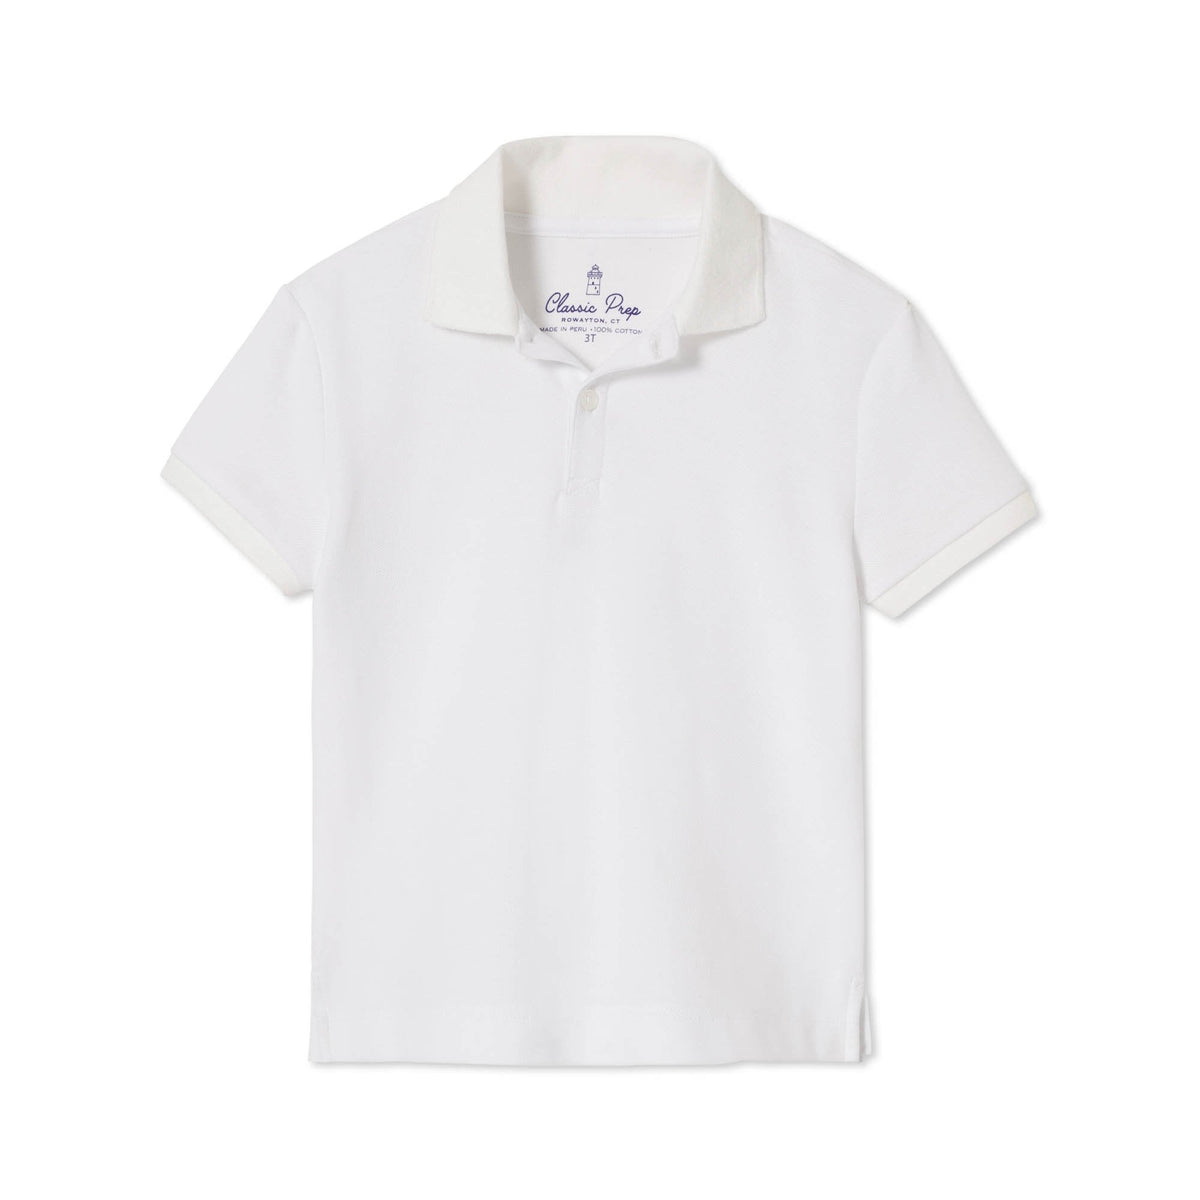 Classic and Preppy Huck Short Sleeve Pique Polo, Bright White-Shirts and Tops-Bright White-2T-CPC - Classic Prep Childrenswear